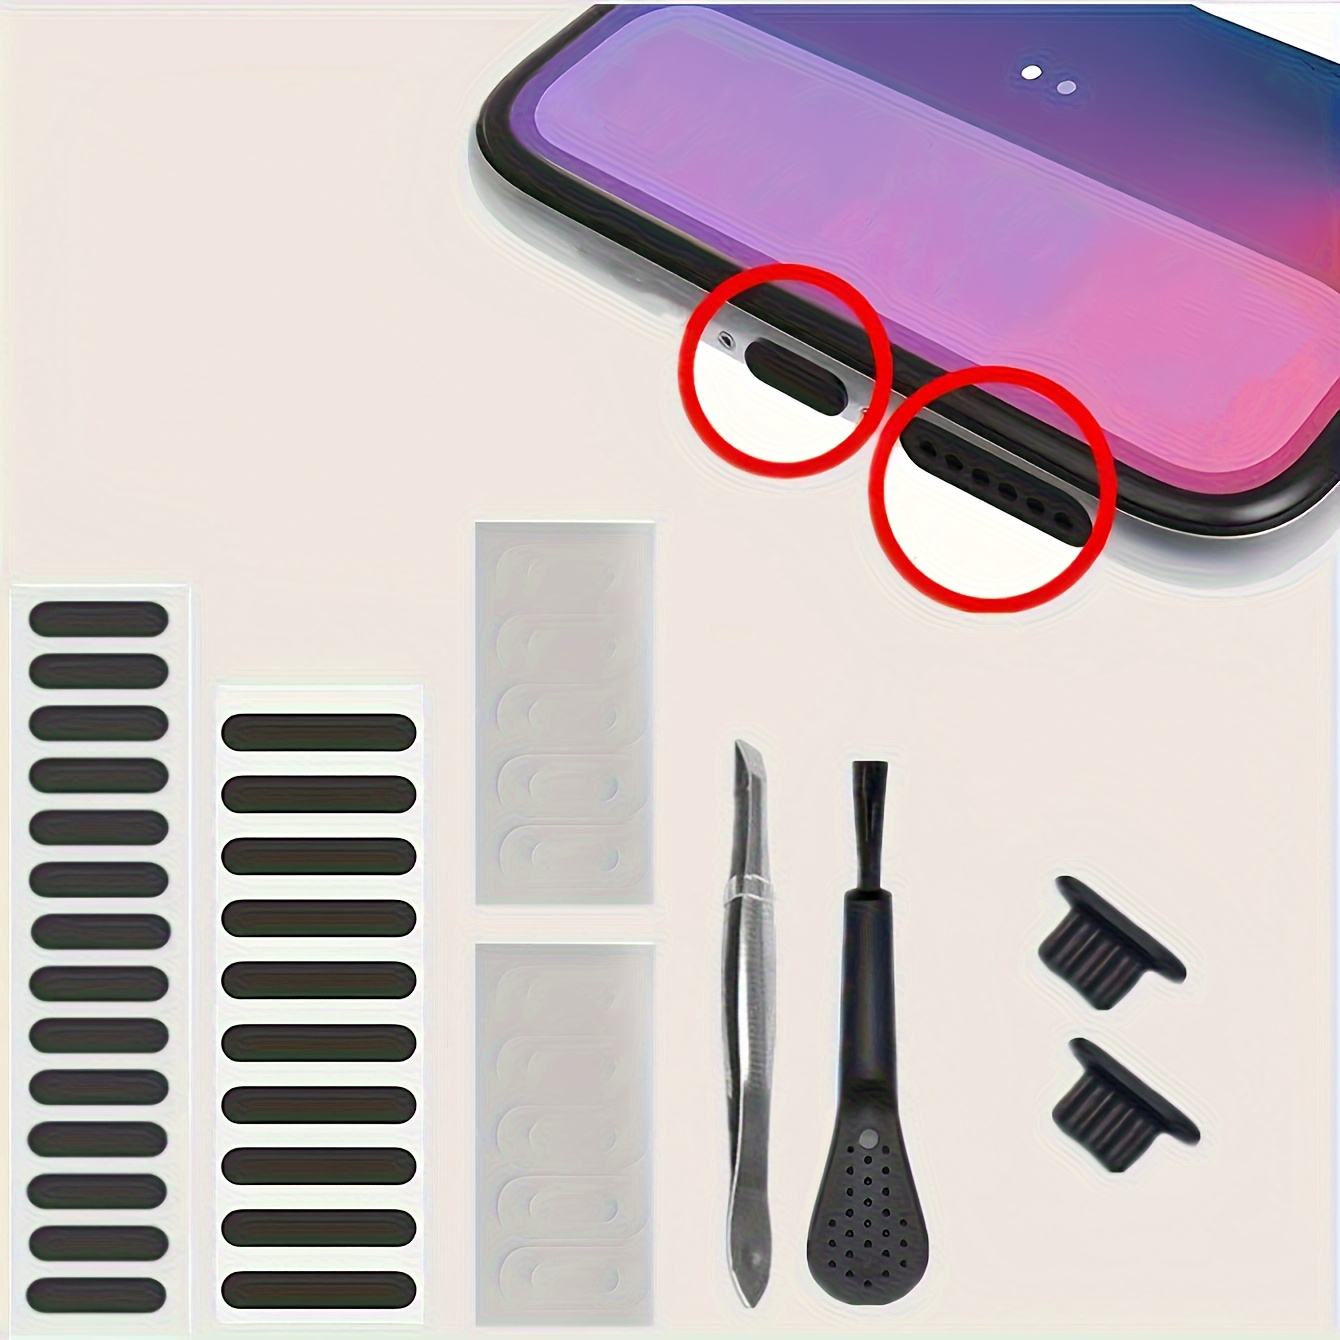 150Pcs Cell Phone Cleaning Kit for iPhone USB Charging Port